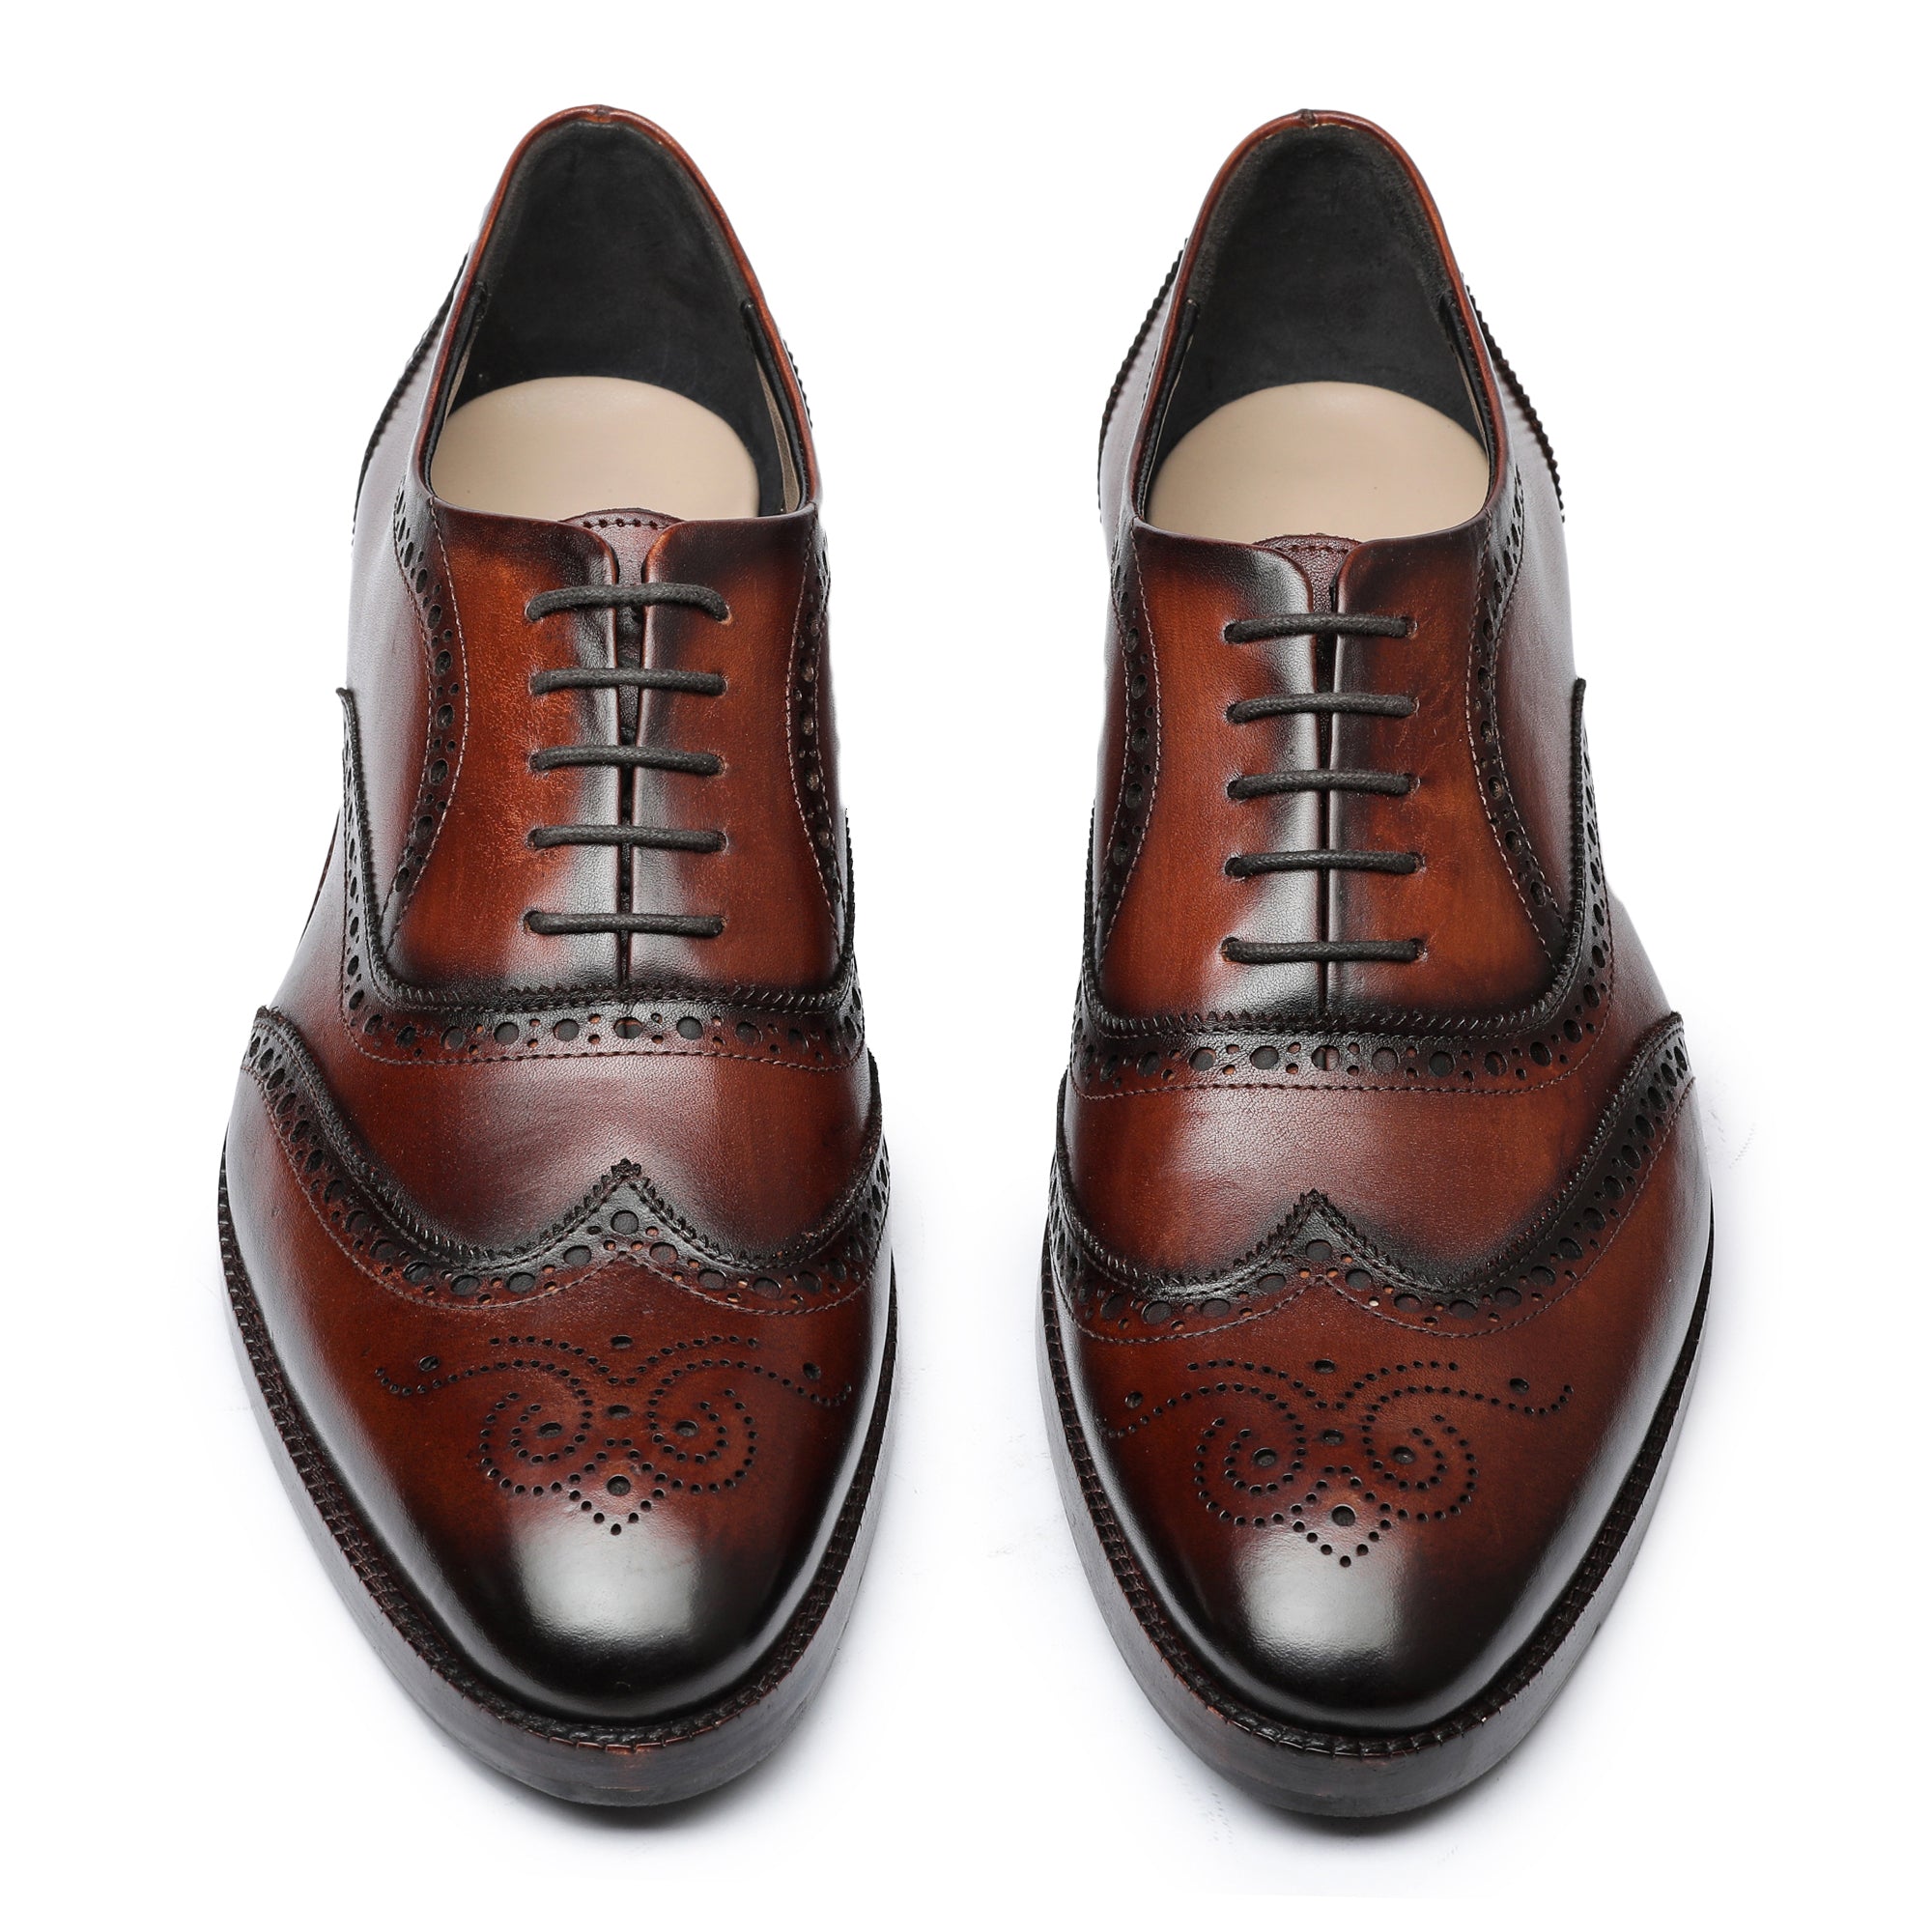 Wingtip Brogue Oxford- Dark Brown | Italian Leather Shoes | Lethato